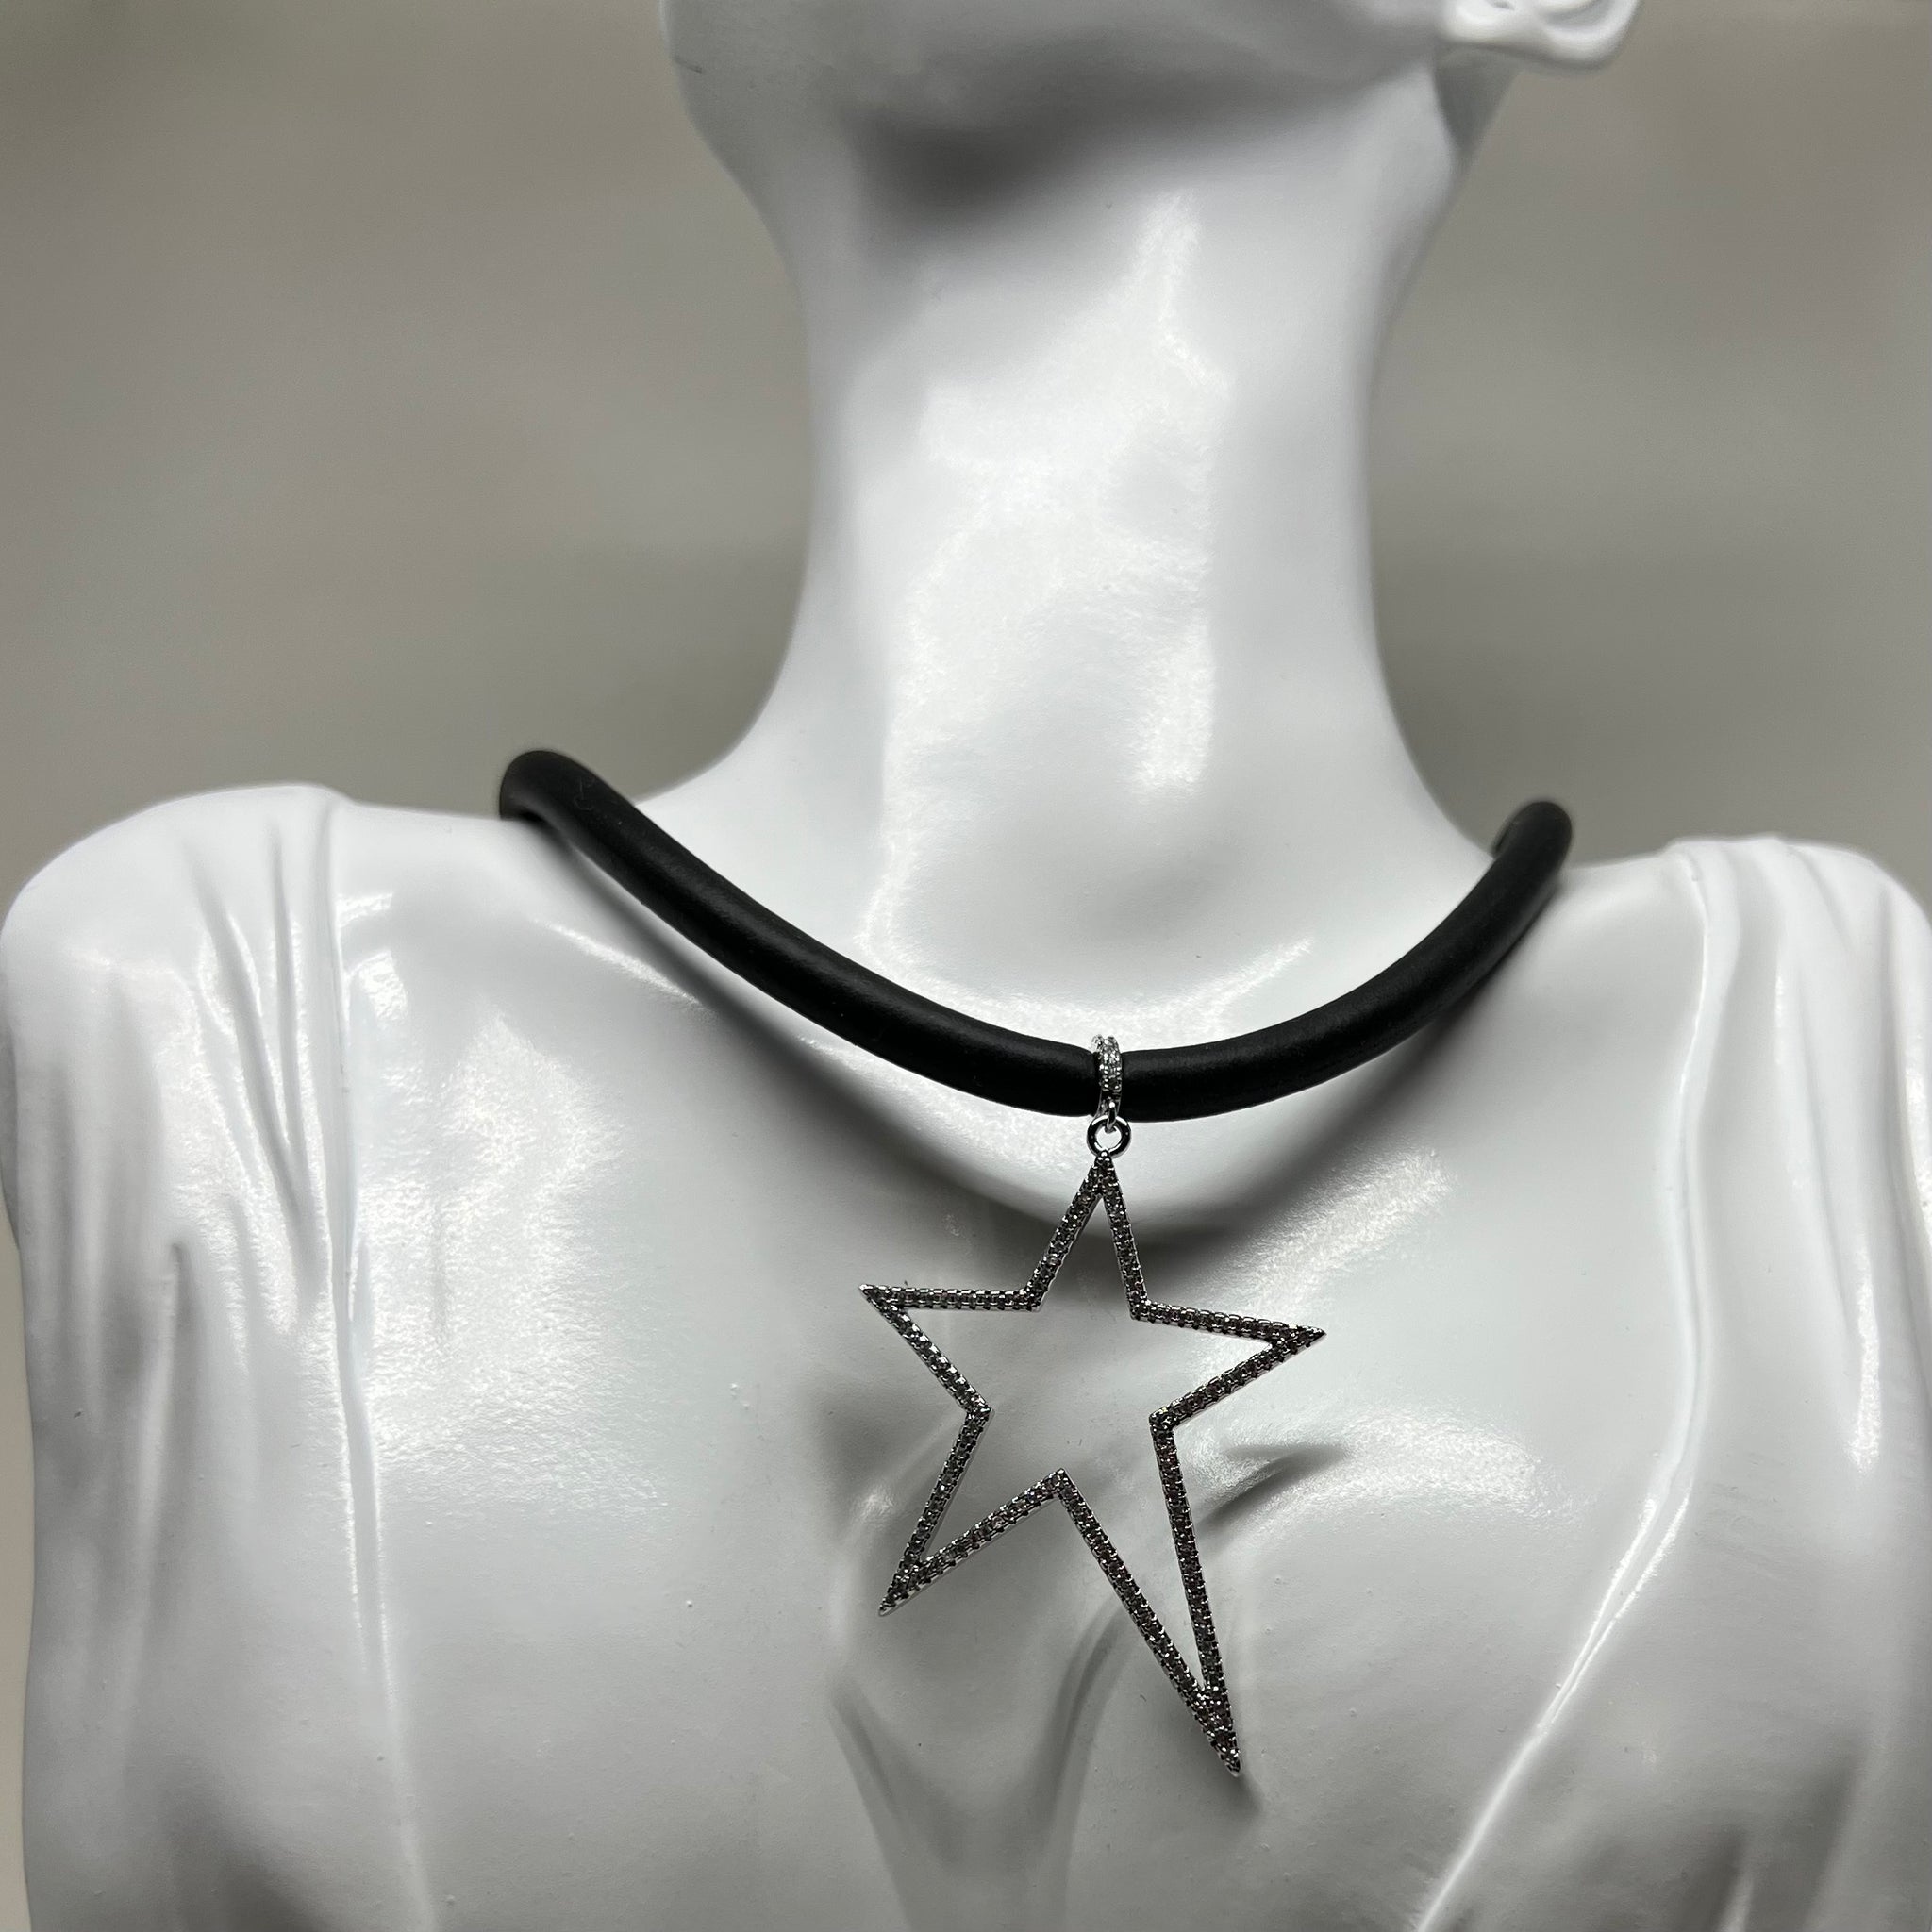 Shining star number necklace by NYET Jewelry